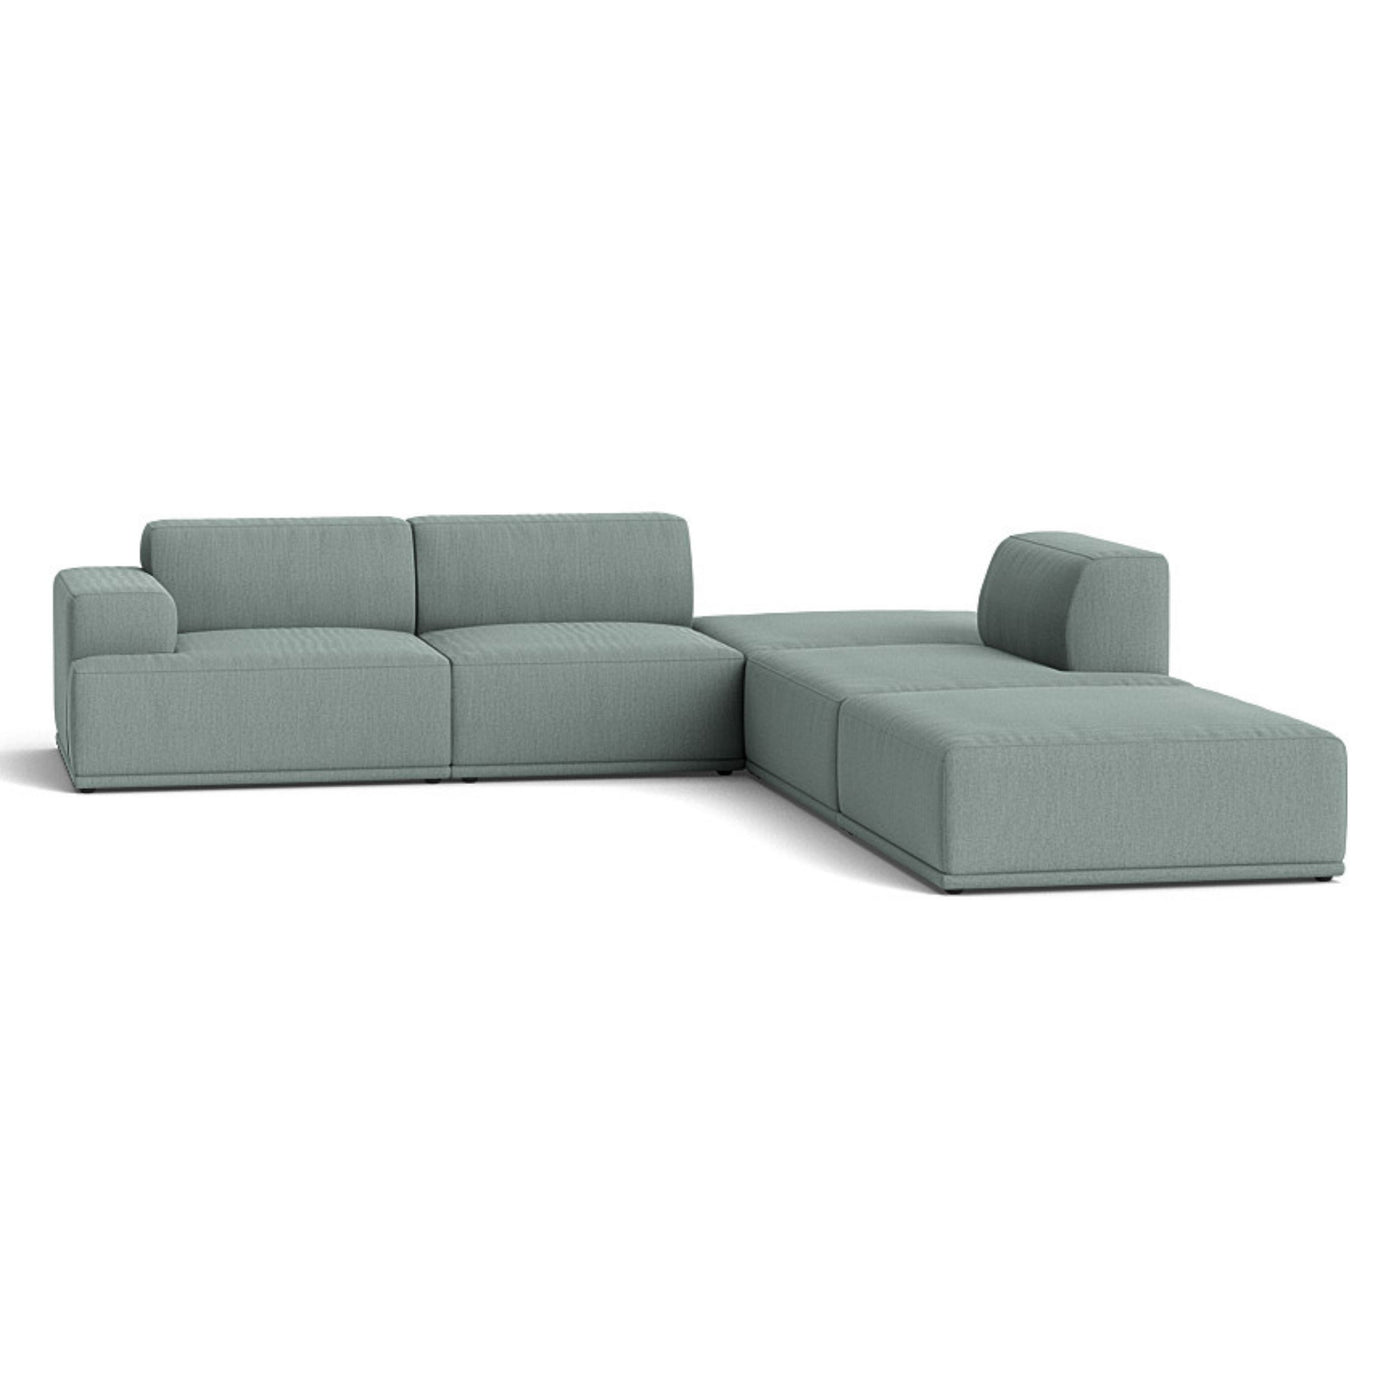 Muuto Connect Soft Modular Corner Sofa, configuration 3. made-to-order from someday designs. #colour_re-wool-828